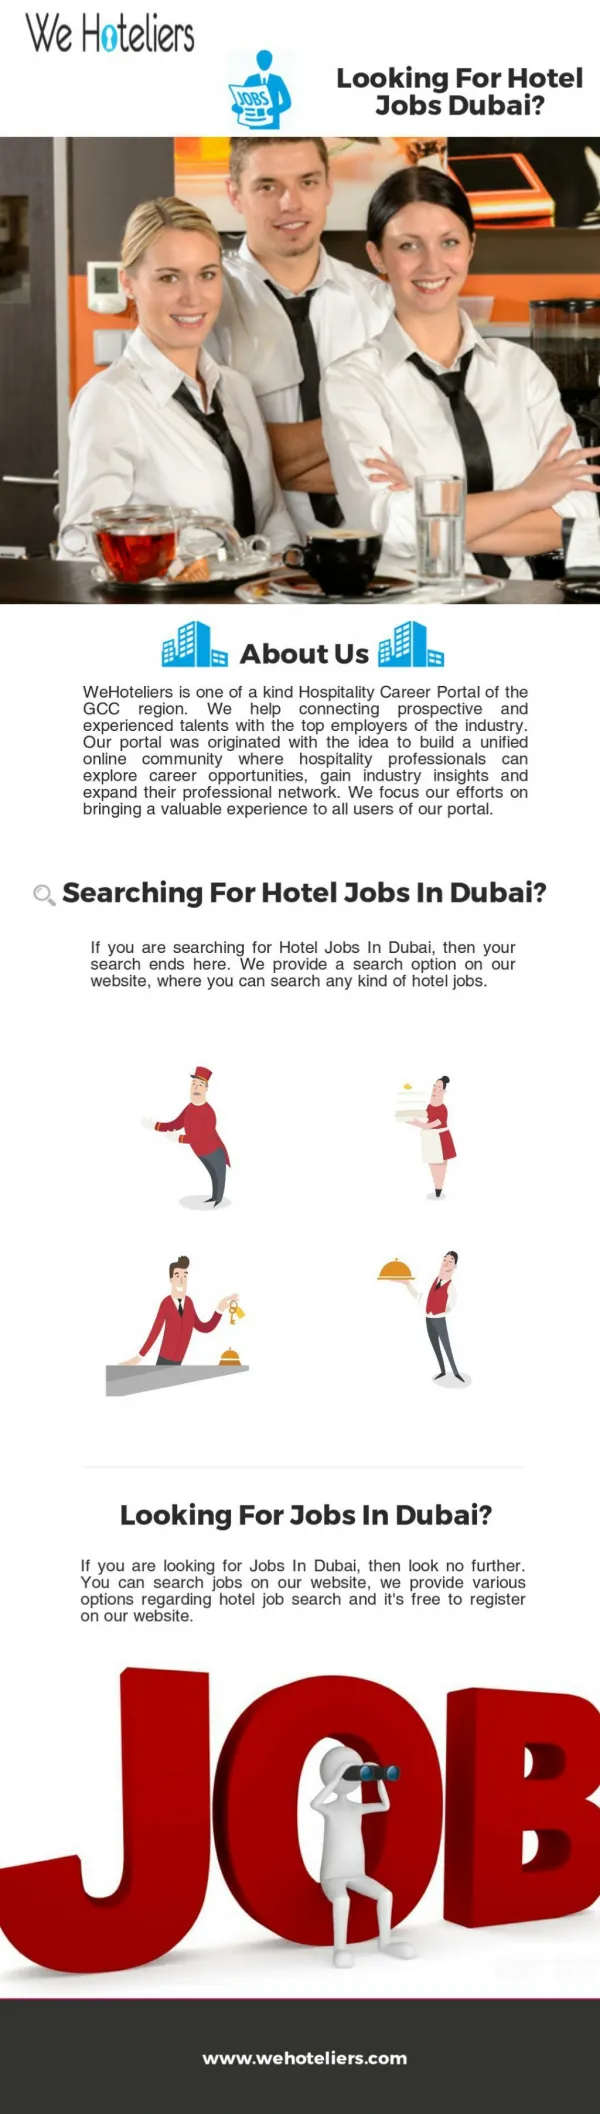 Looking For Hotel Jobs Dubai According To Qualifications?